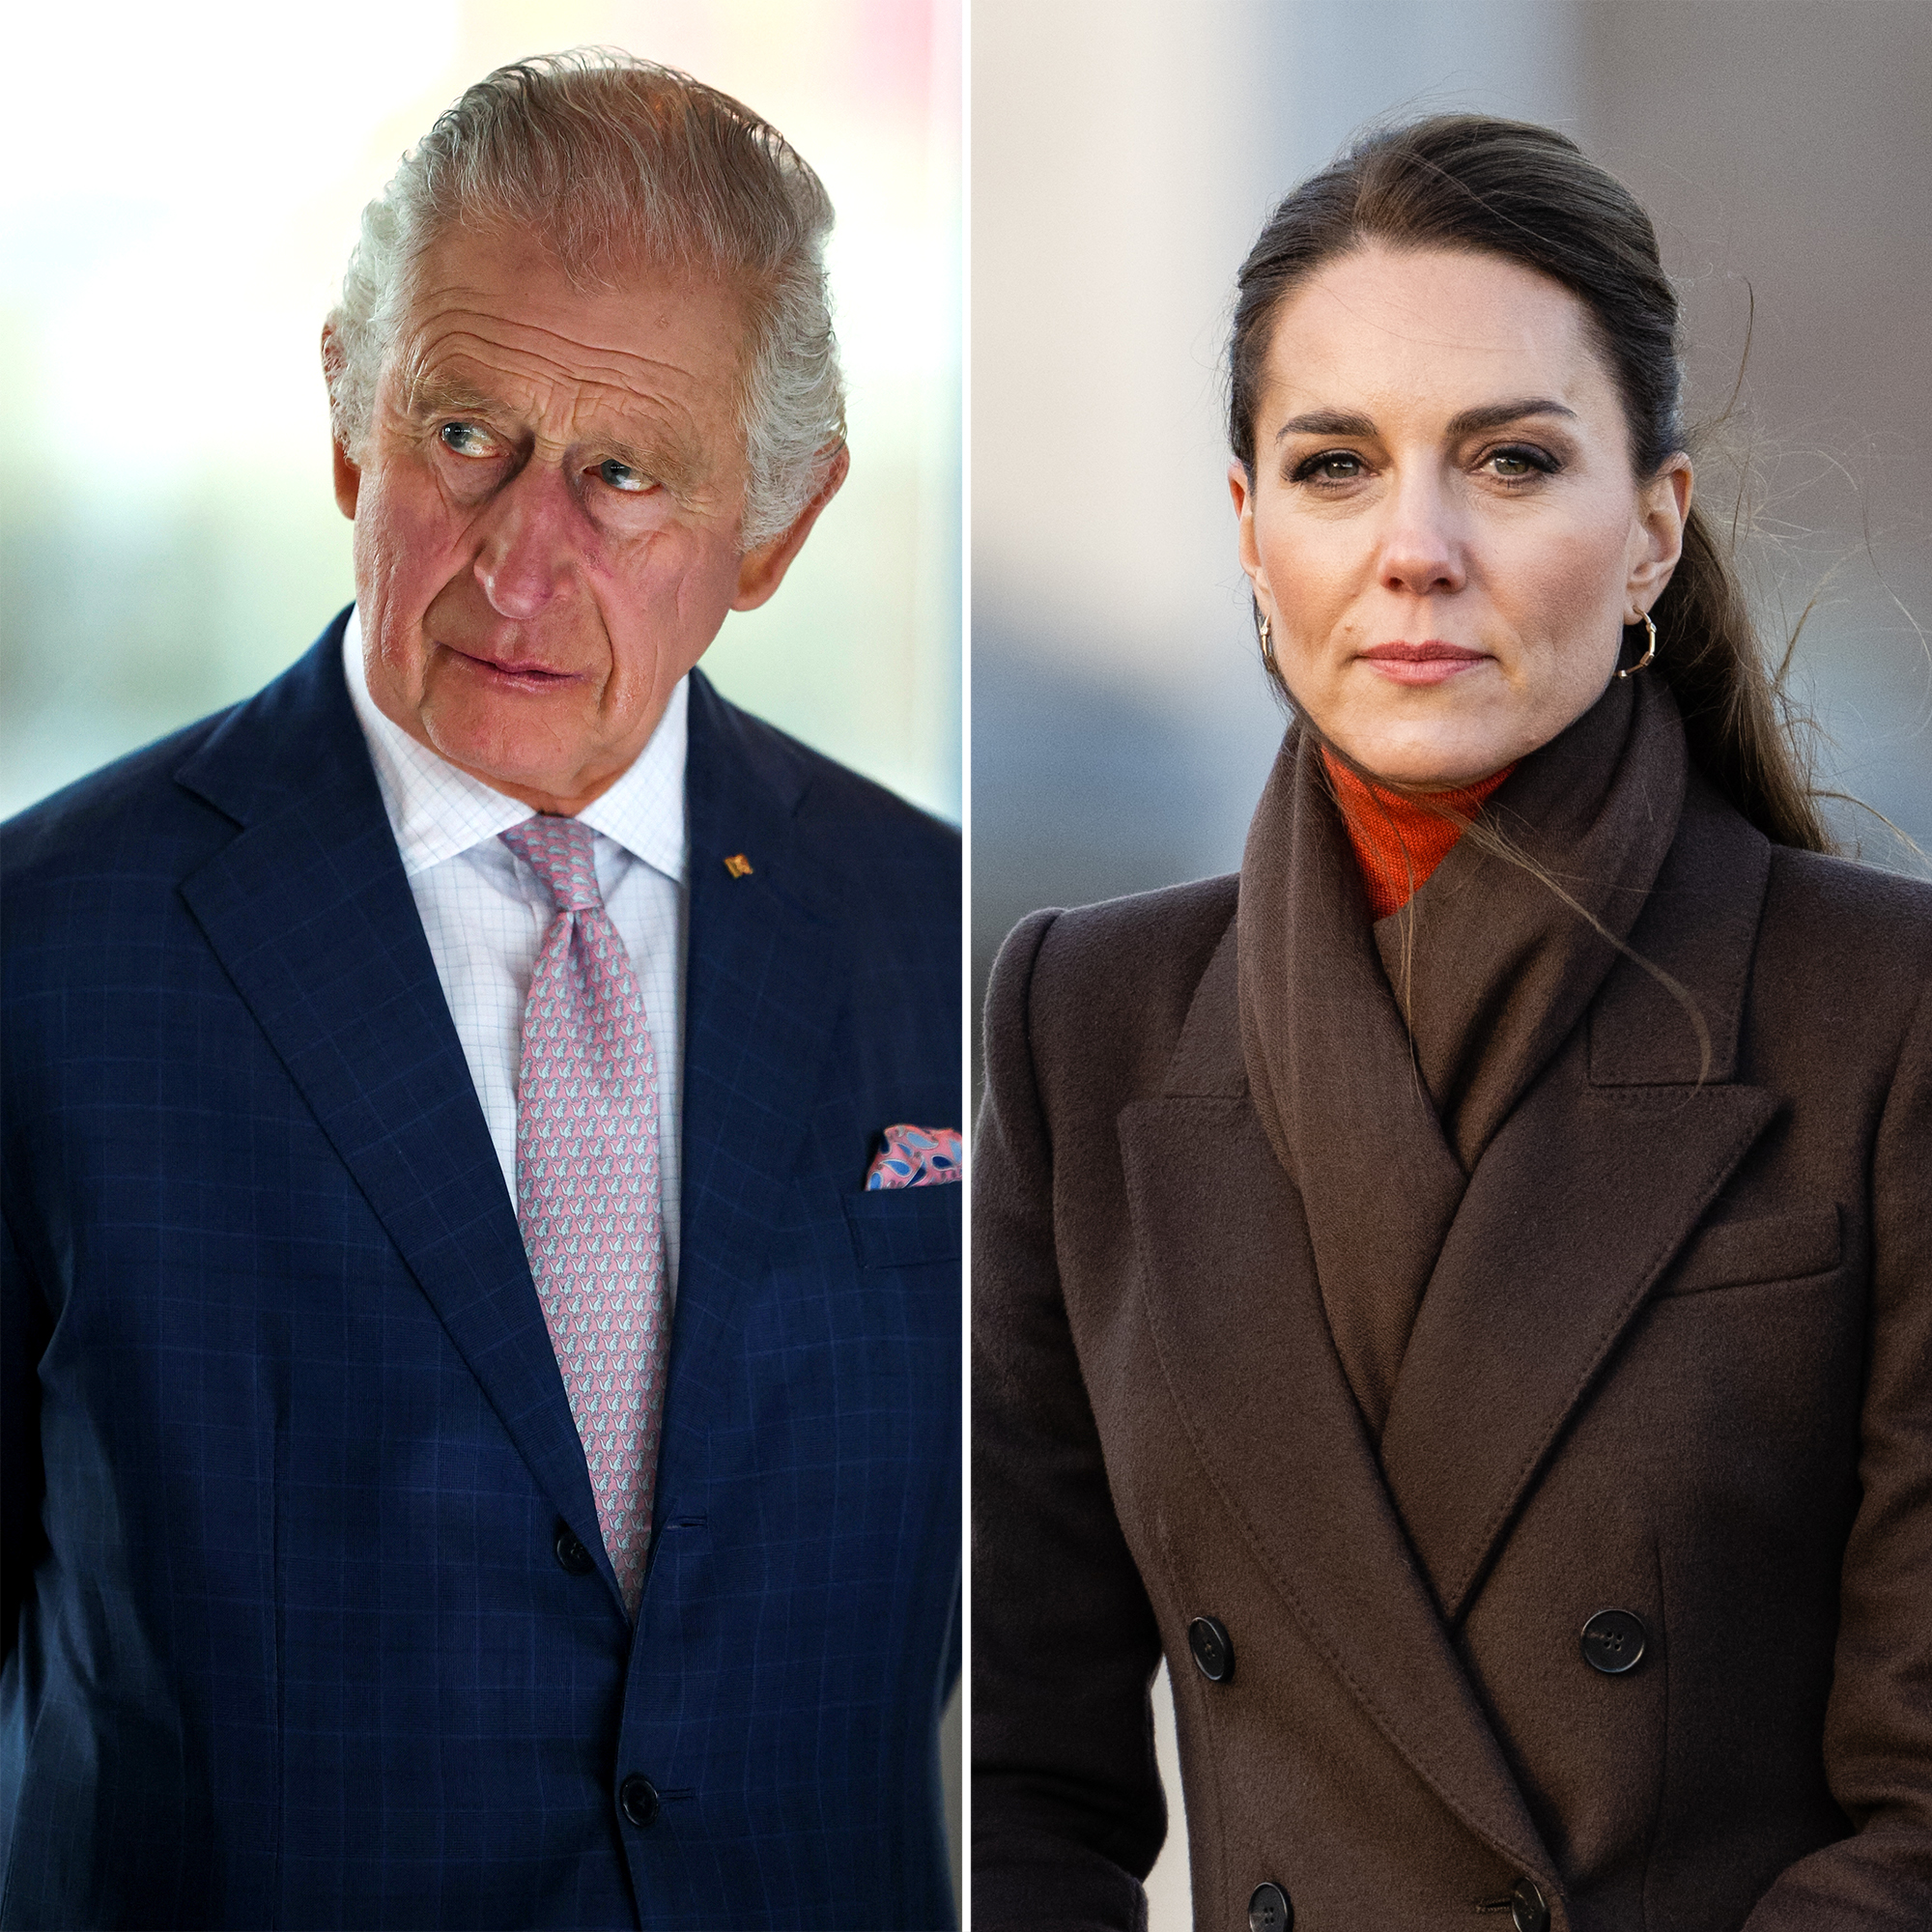 King Charles III Says He’s So Proud of Kate Middleton in 1st Statement About Her Cancer Battle